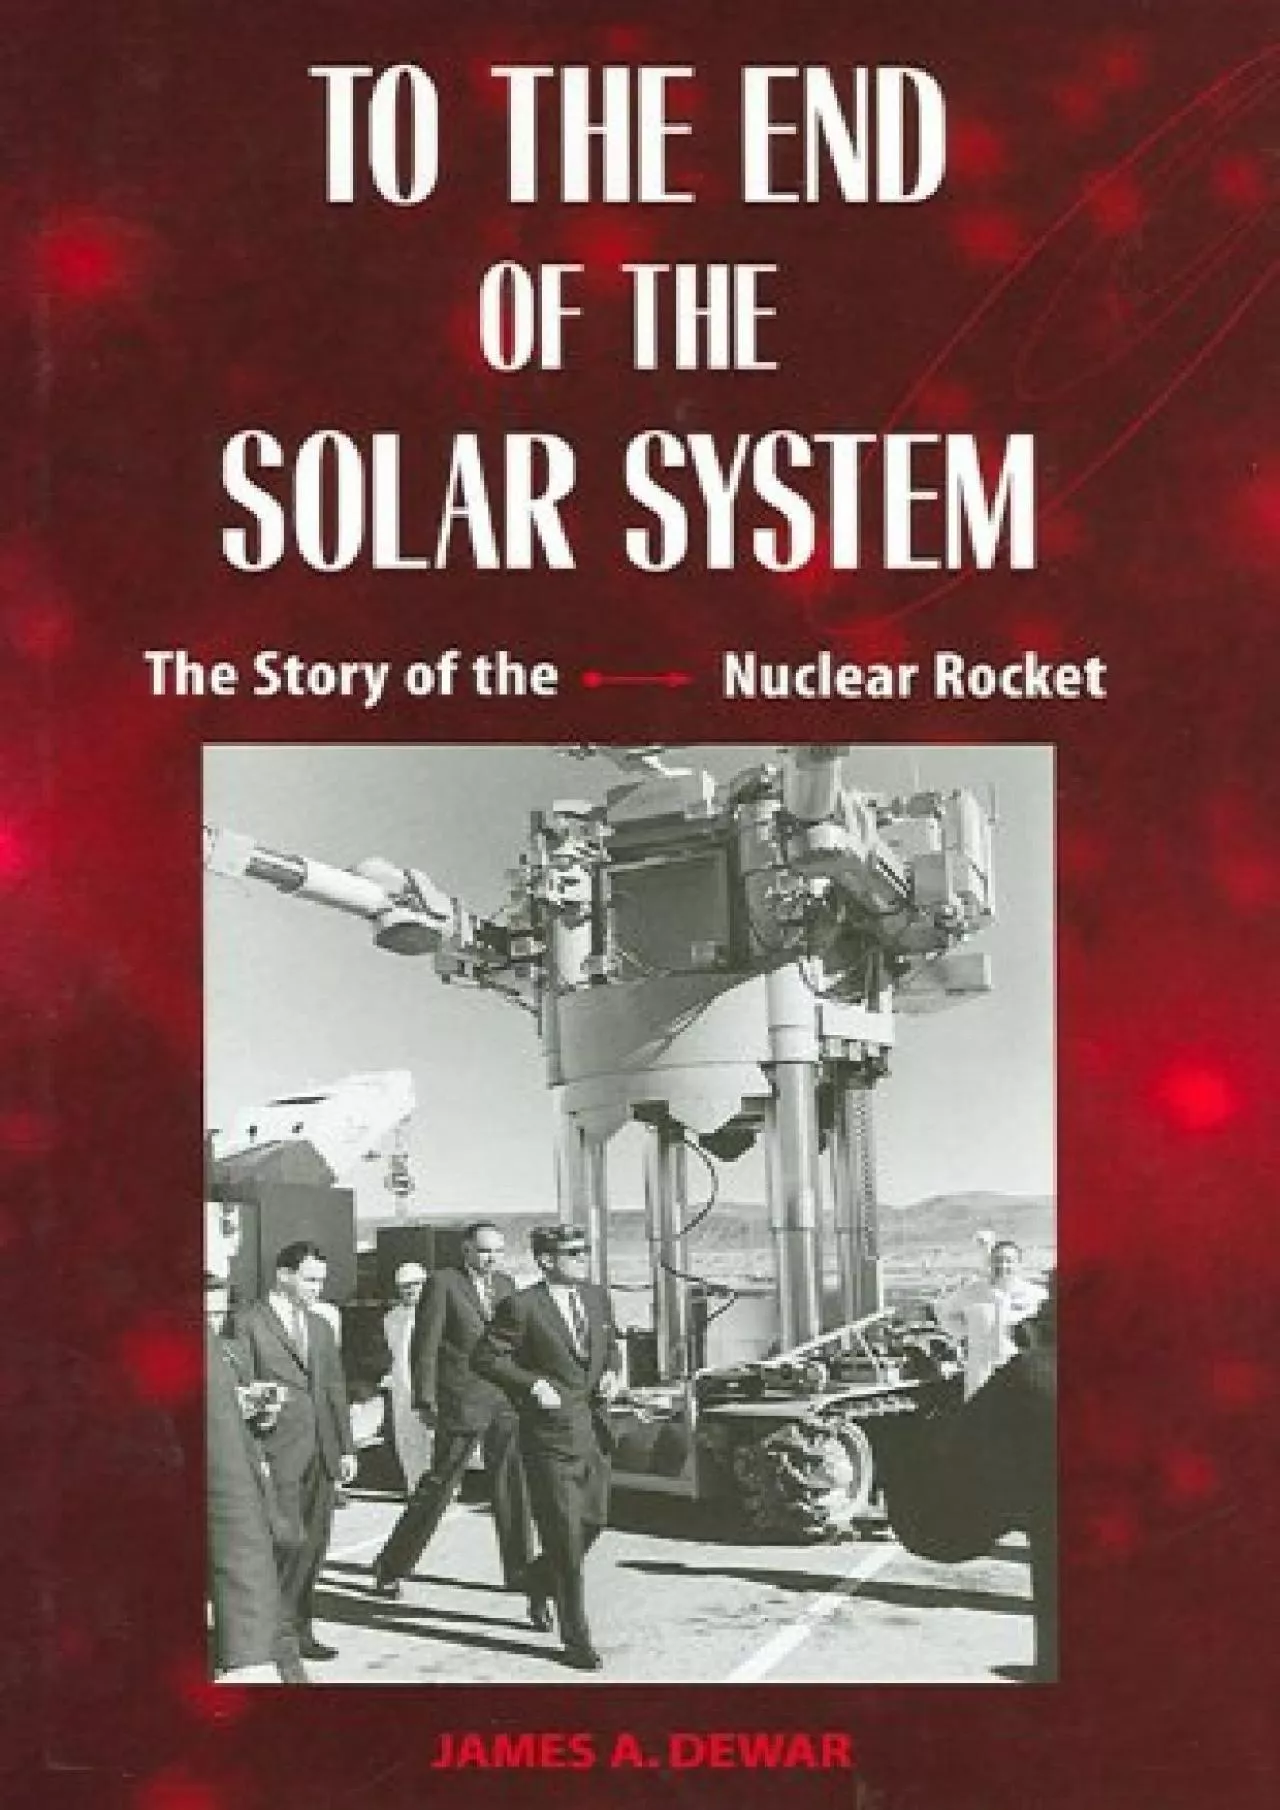 (BOOK)-To the End of the Solar System: The Story of the Nuclear Rocket